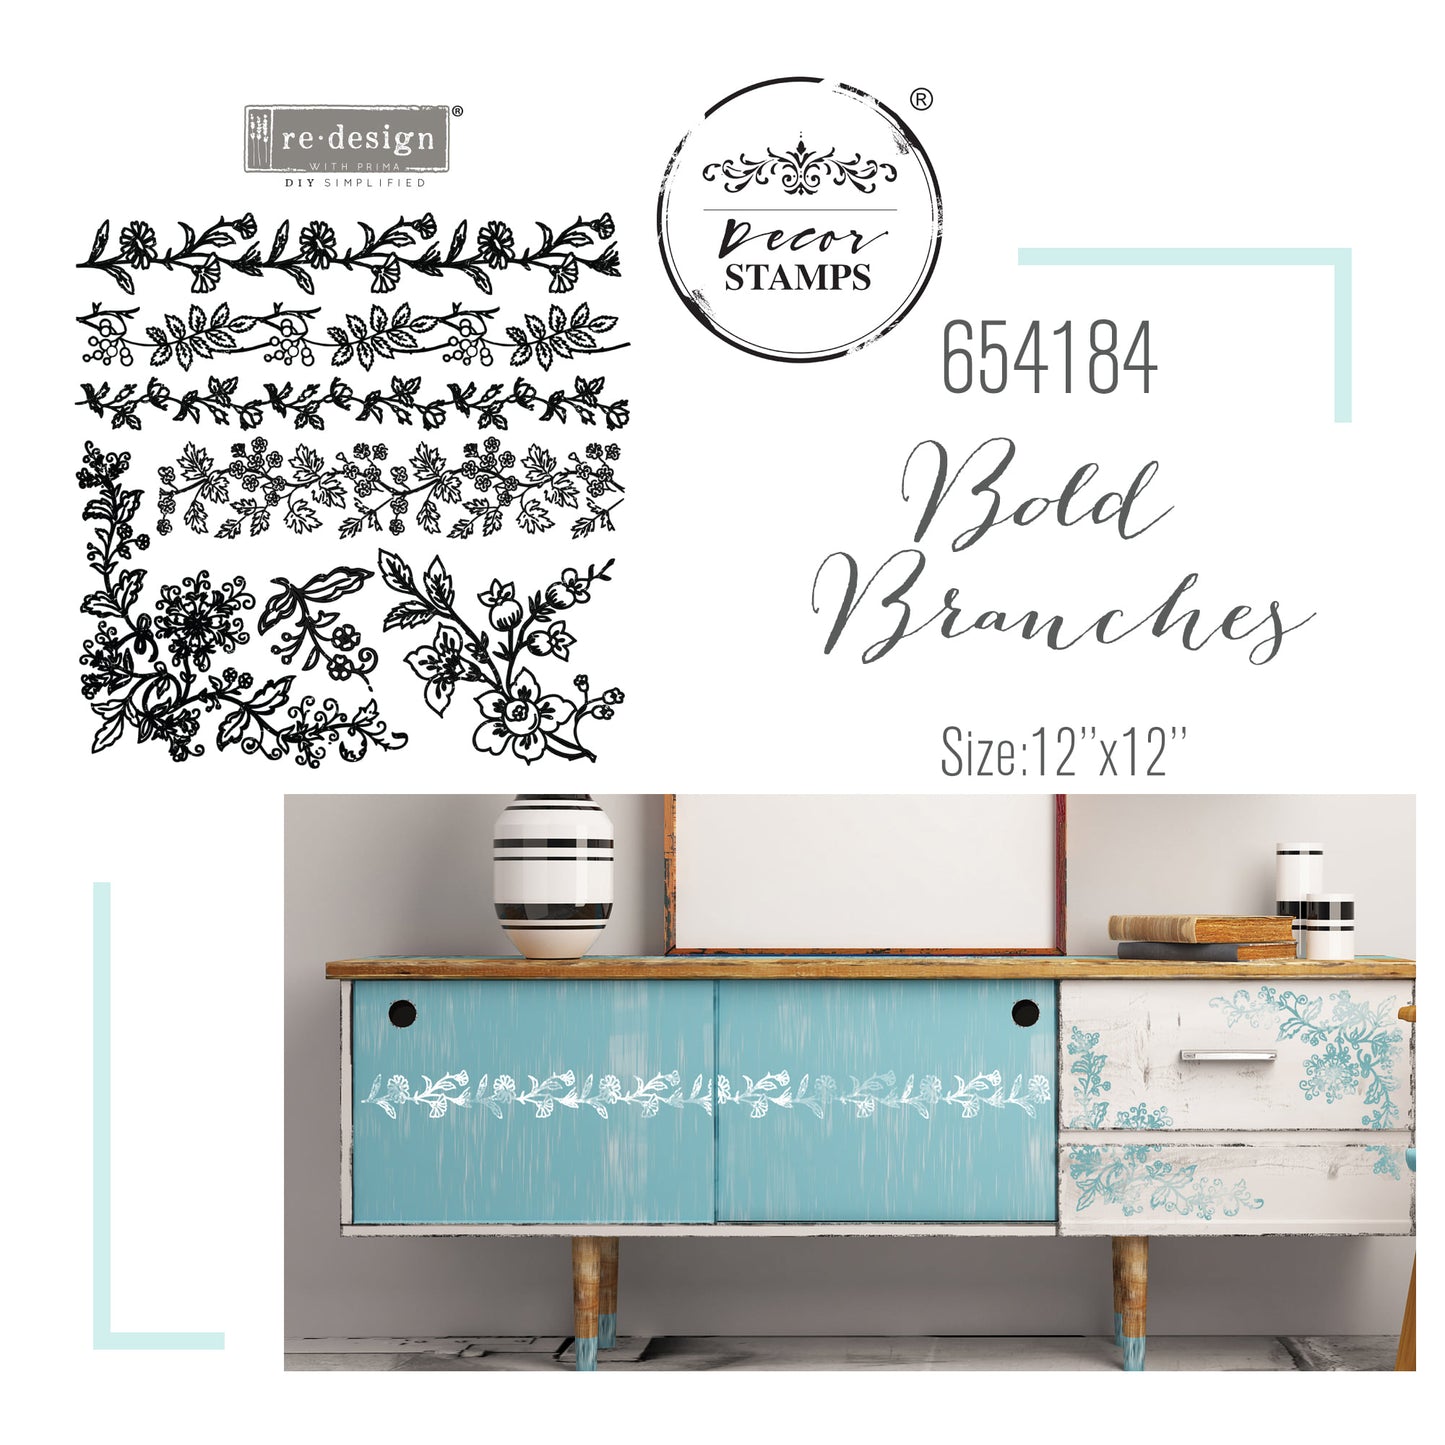 Bold Branches - Re-design Stamp